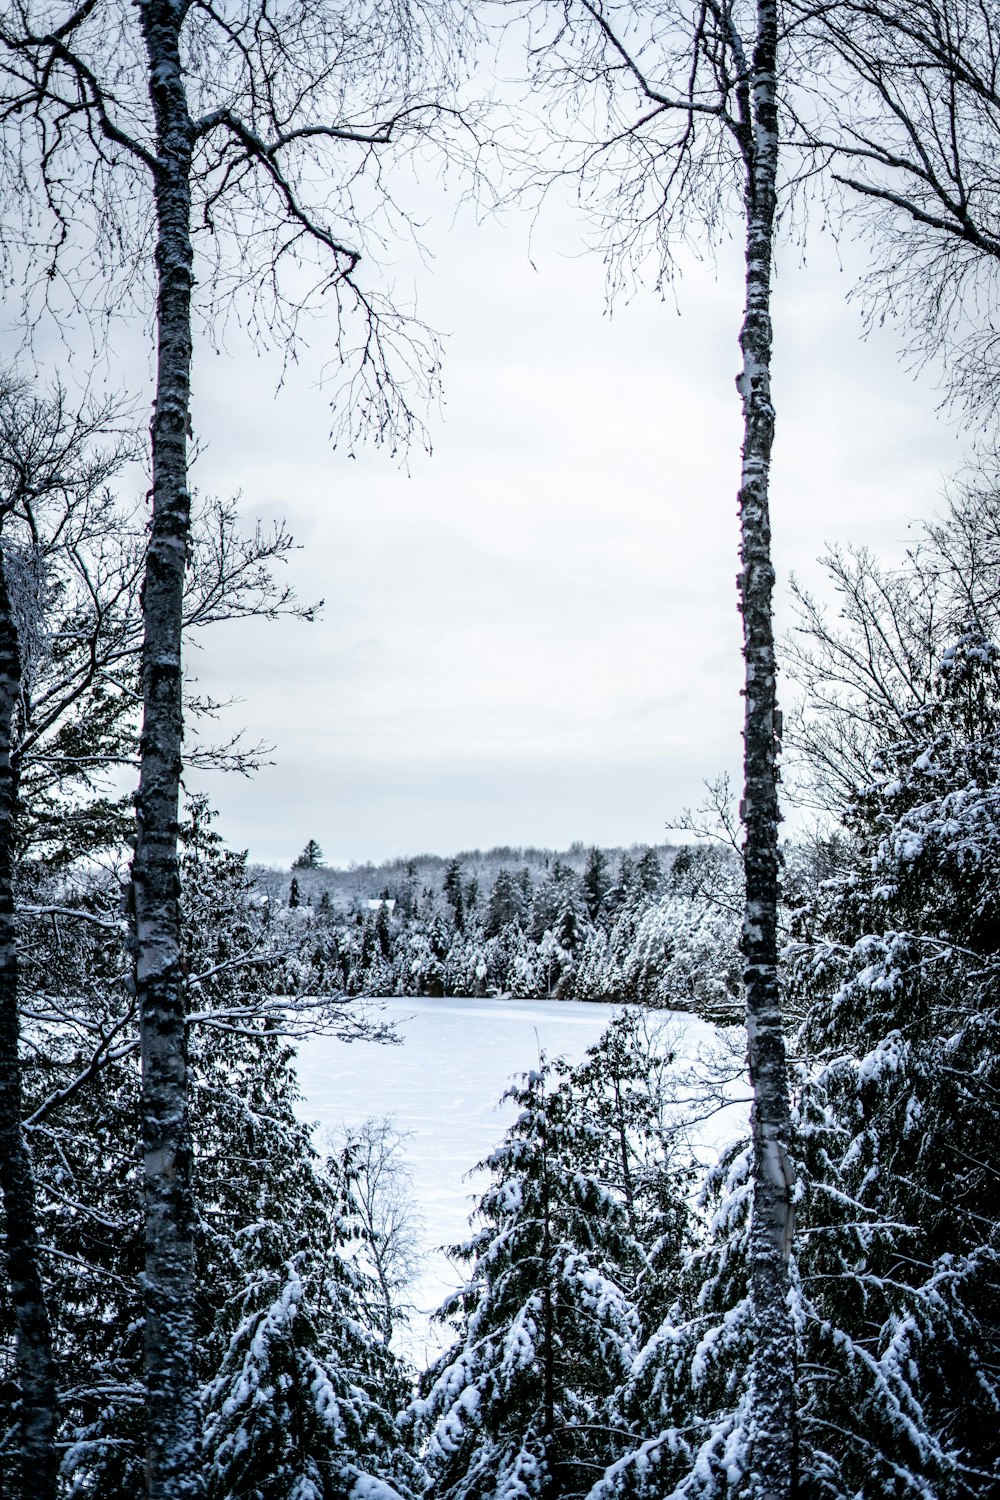 a snowy landscape with trees and a lake